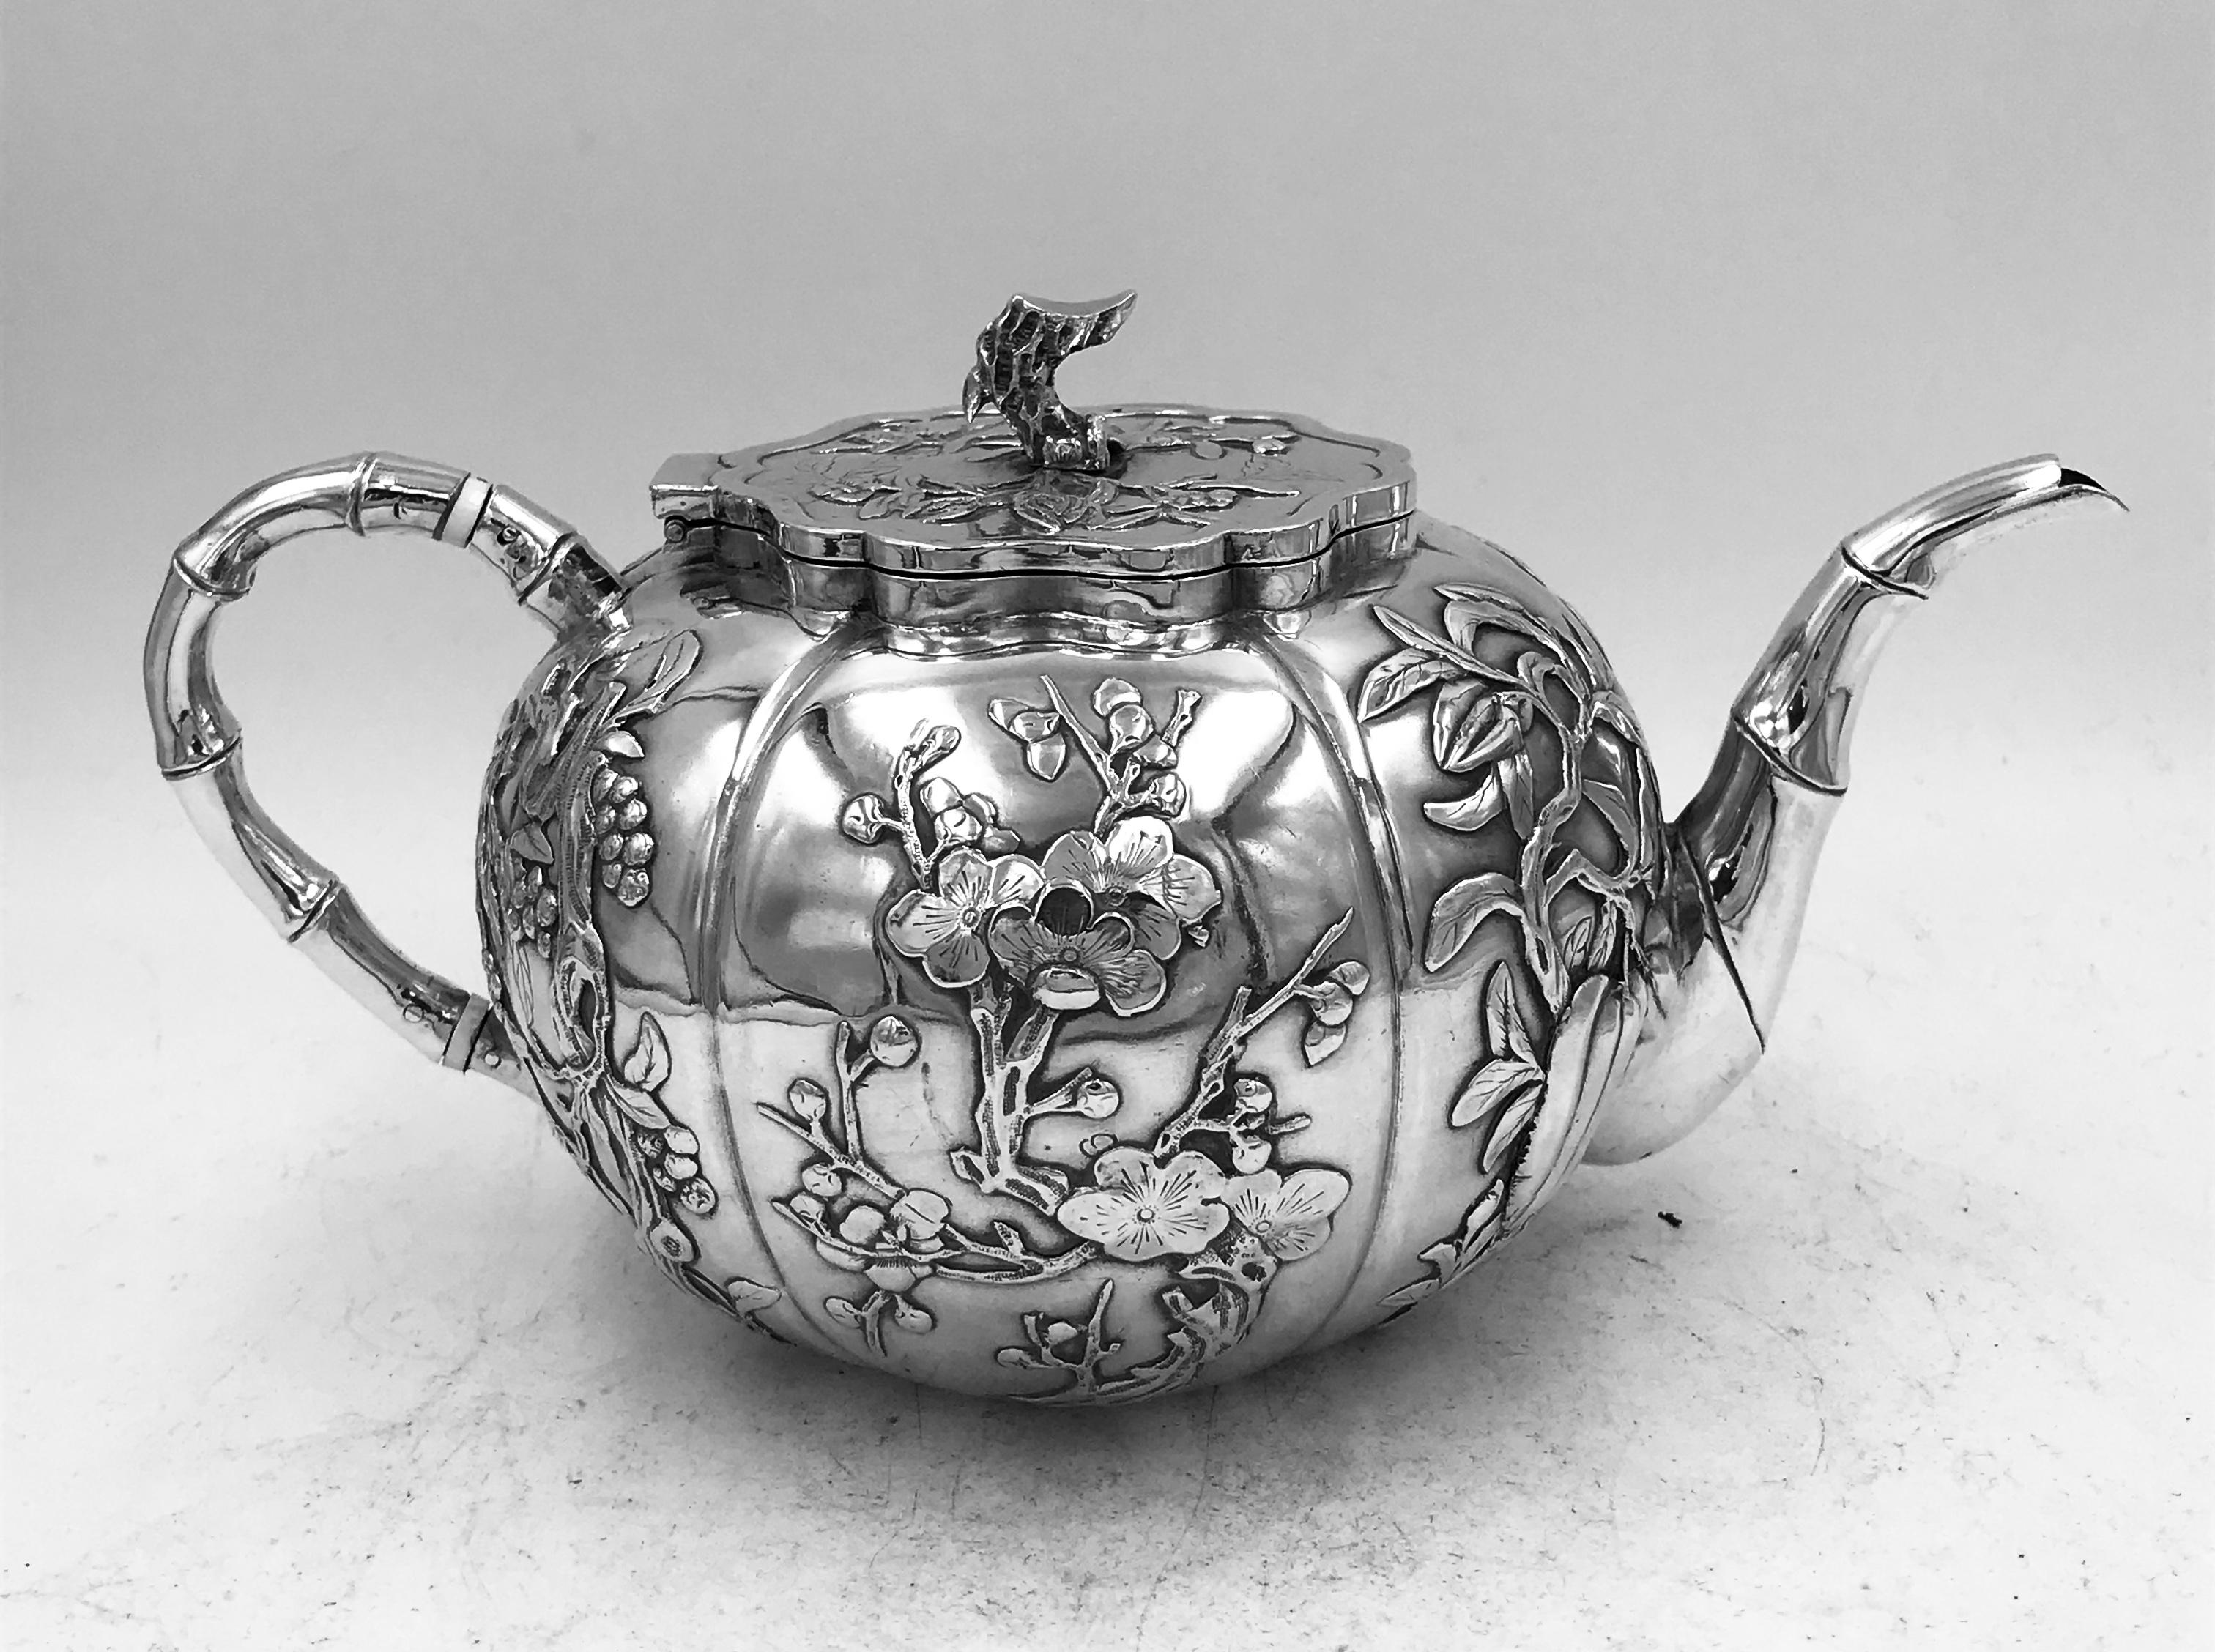 A Chinese Export Silver 3-piece Teaset of round segmented form, profusely decorated with flowers and foliage. The retailer's mark on all three pieces is TS, which can be either Tien Shing  天盛, or Tai Sang  大生. The maker's mark is 伯 (Bo) on the sugar